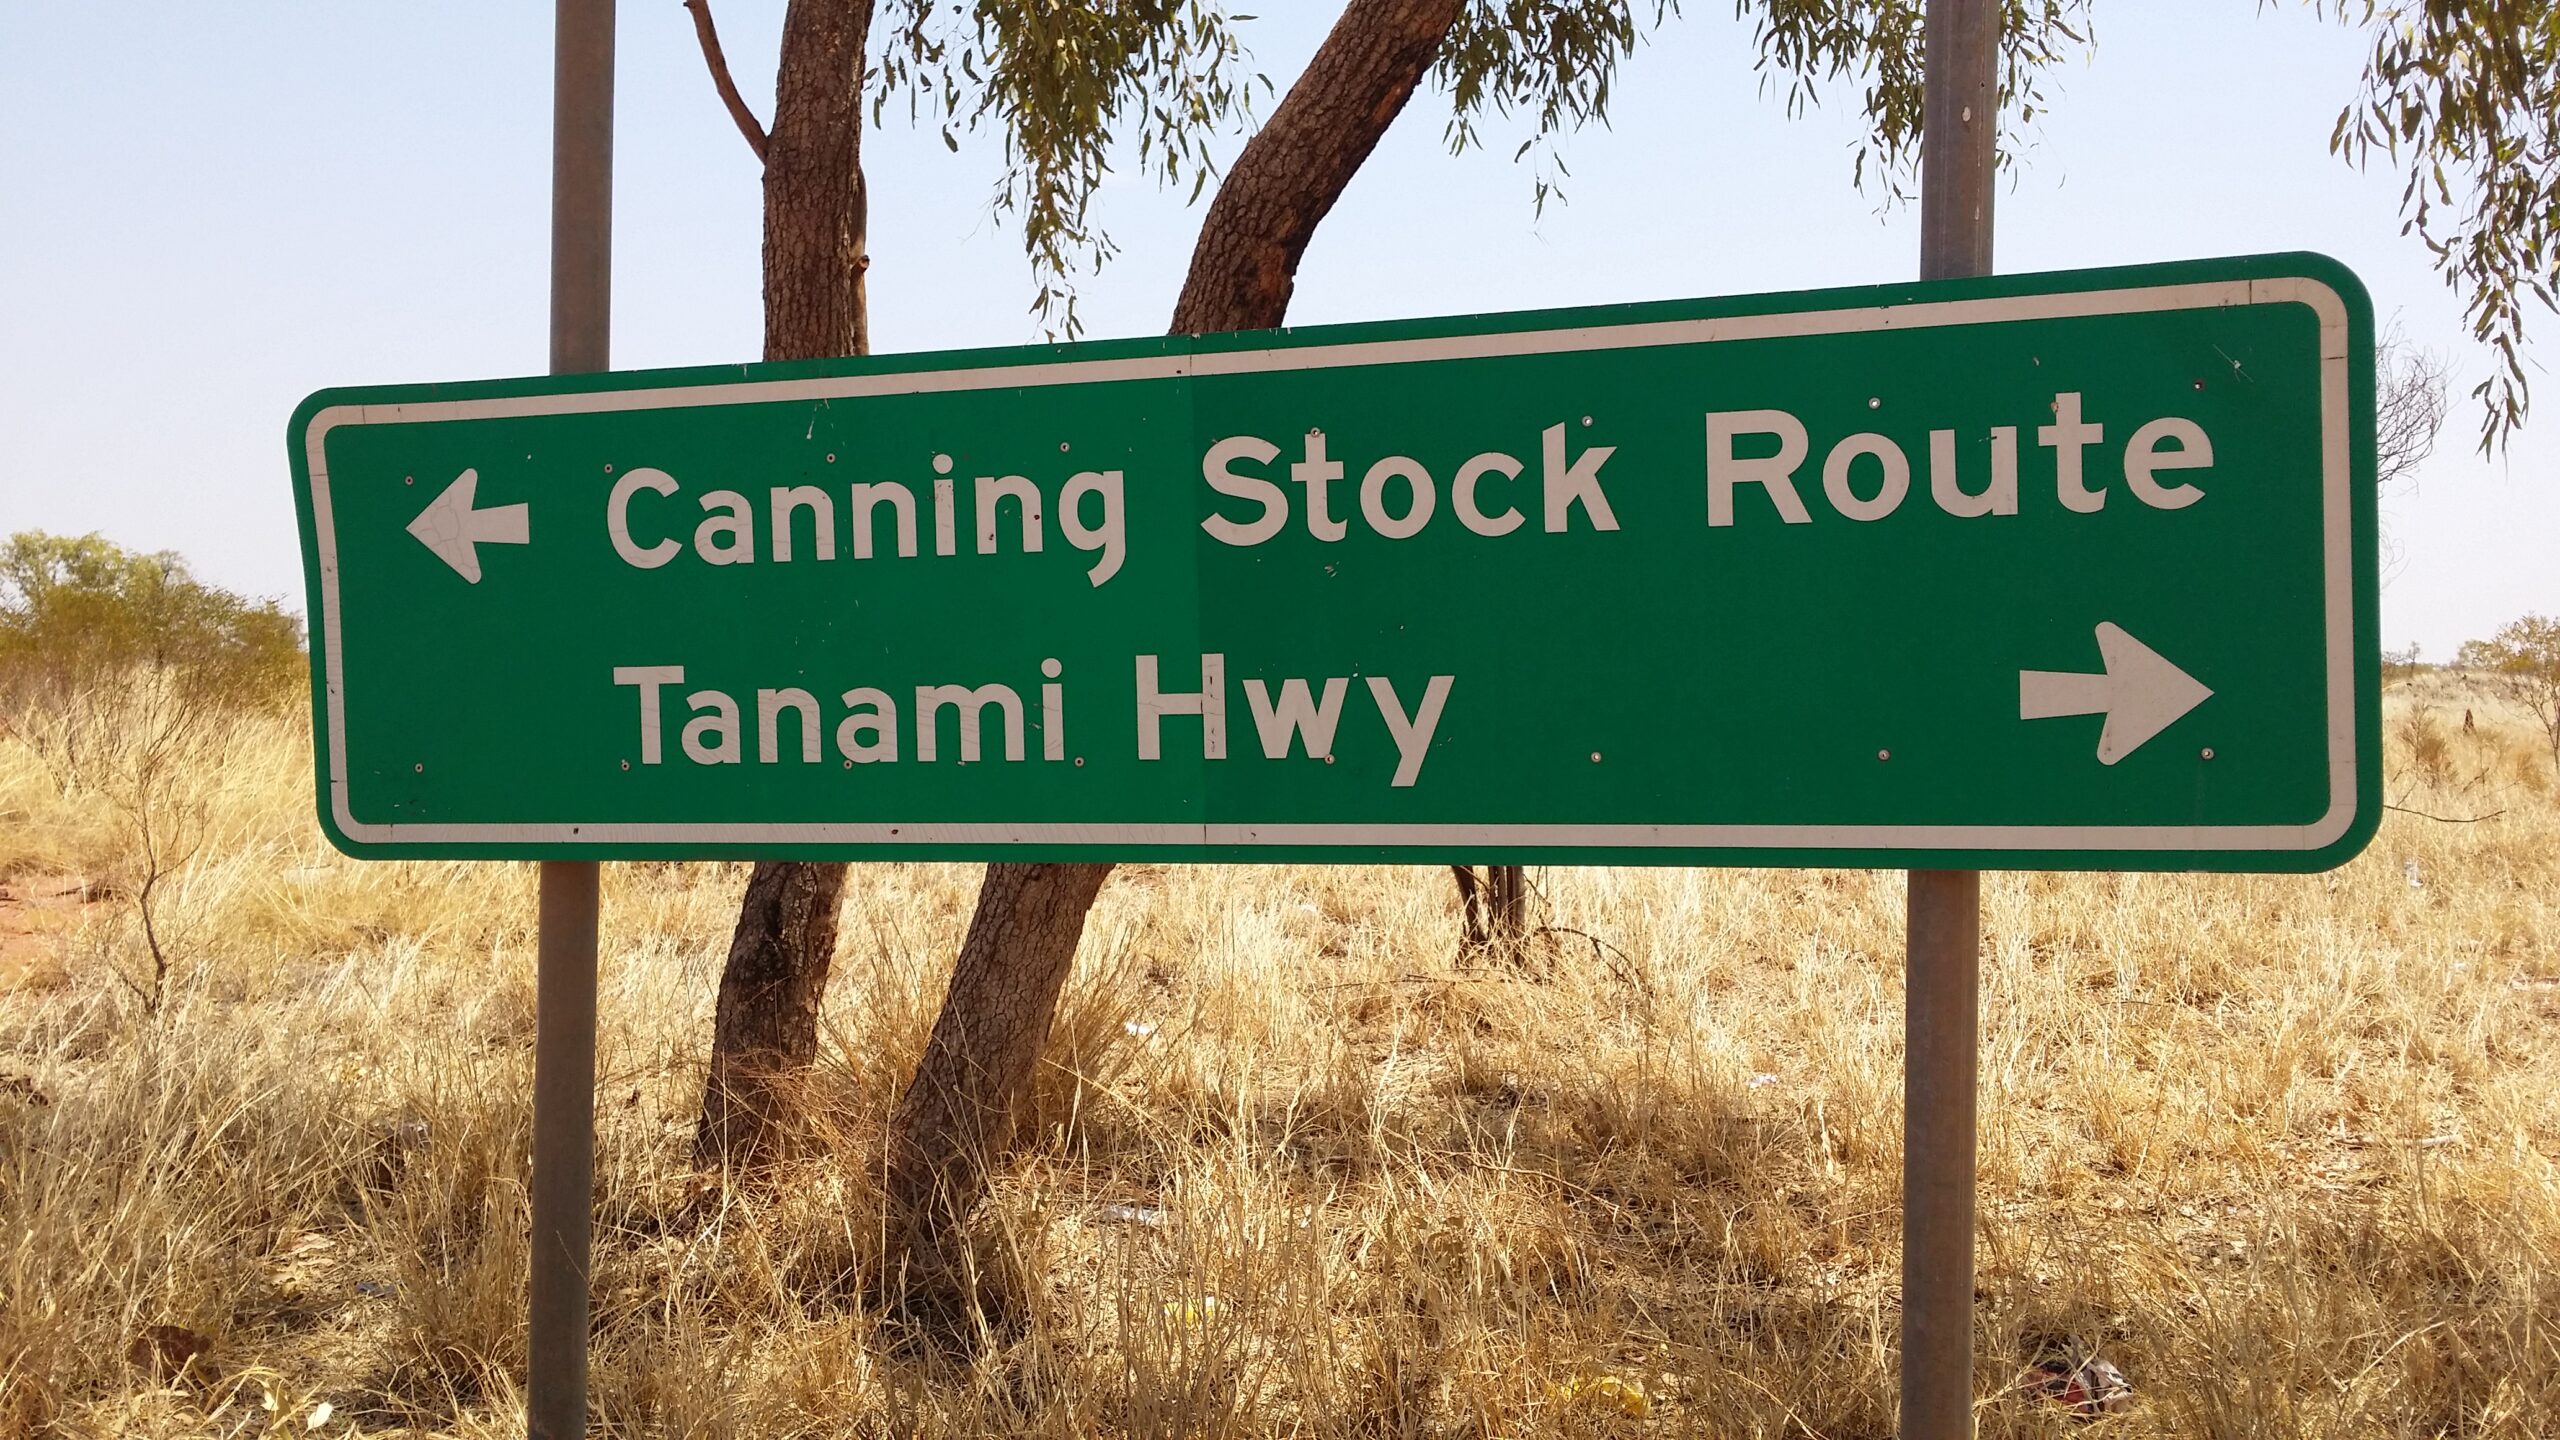 Canning Stock Route Tour Broome to Newman or Broome 16 days